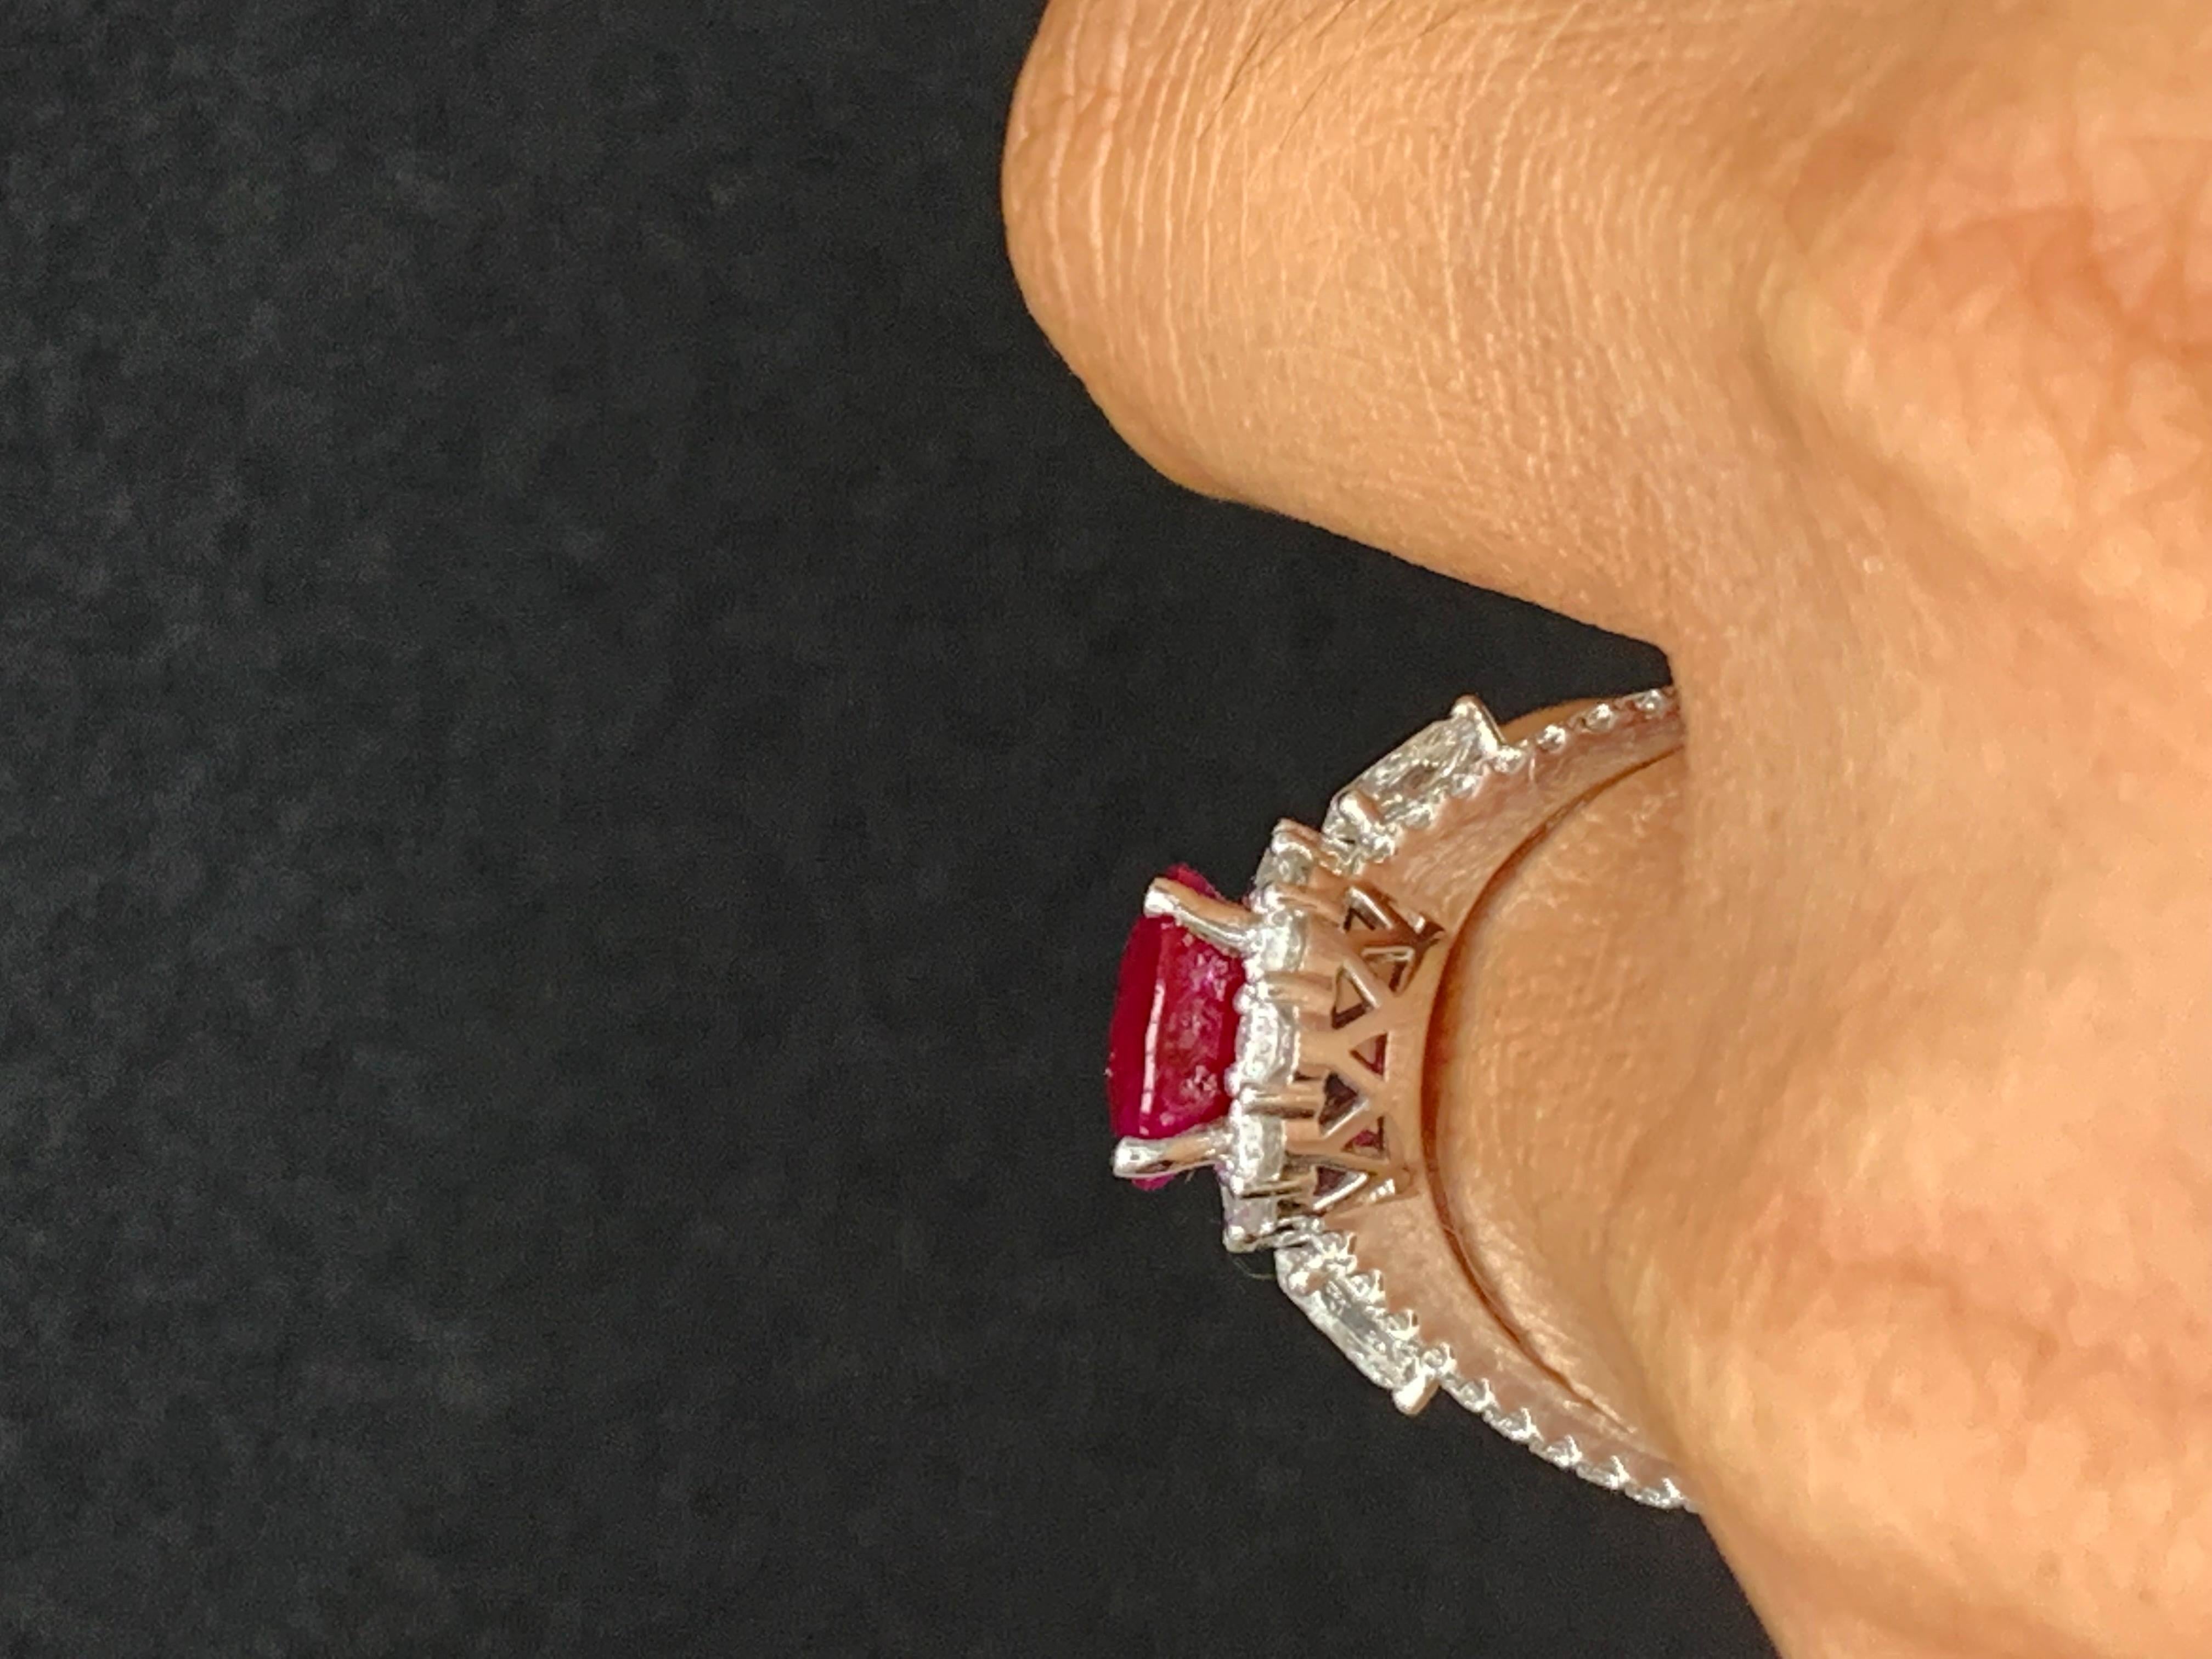 3.58 Carat Oval Cut Ruby and Diamond Halo Ring in 18K White Gold For Sale 9